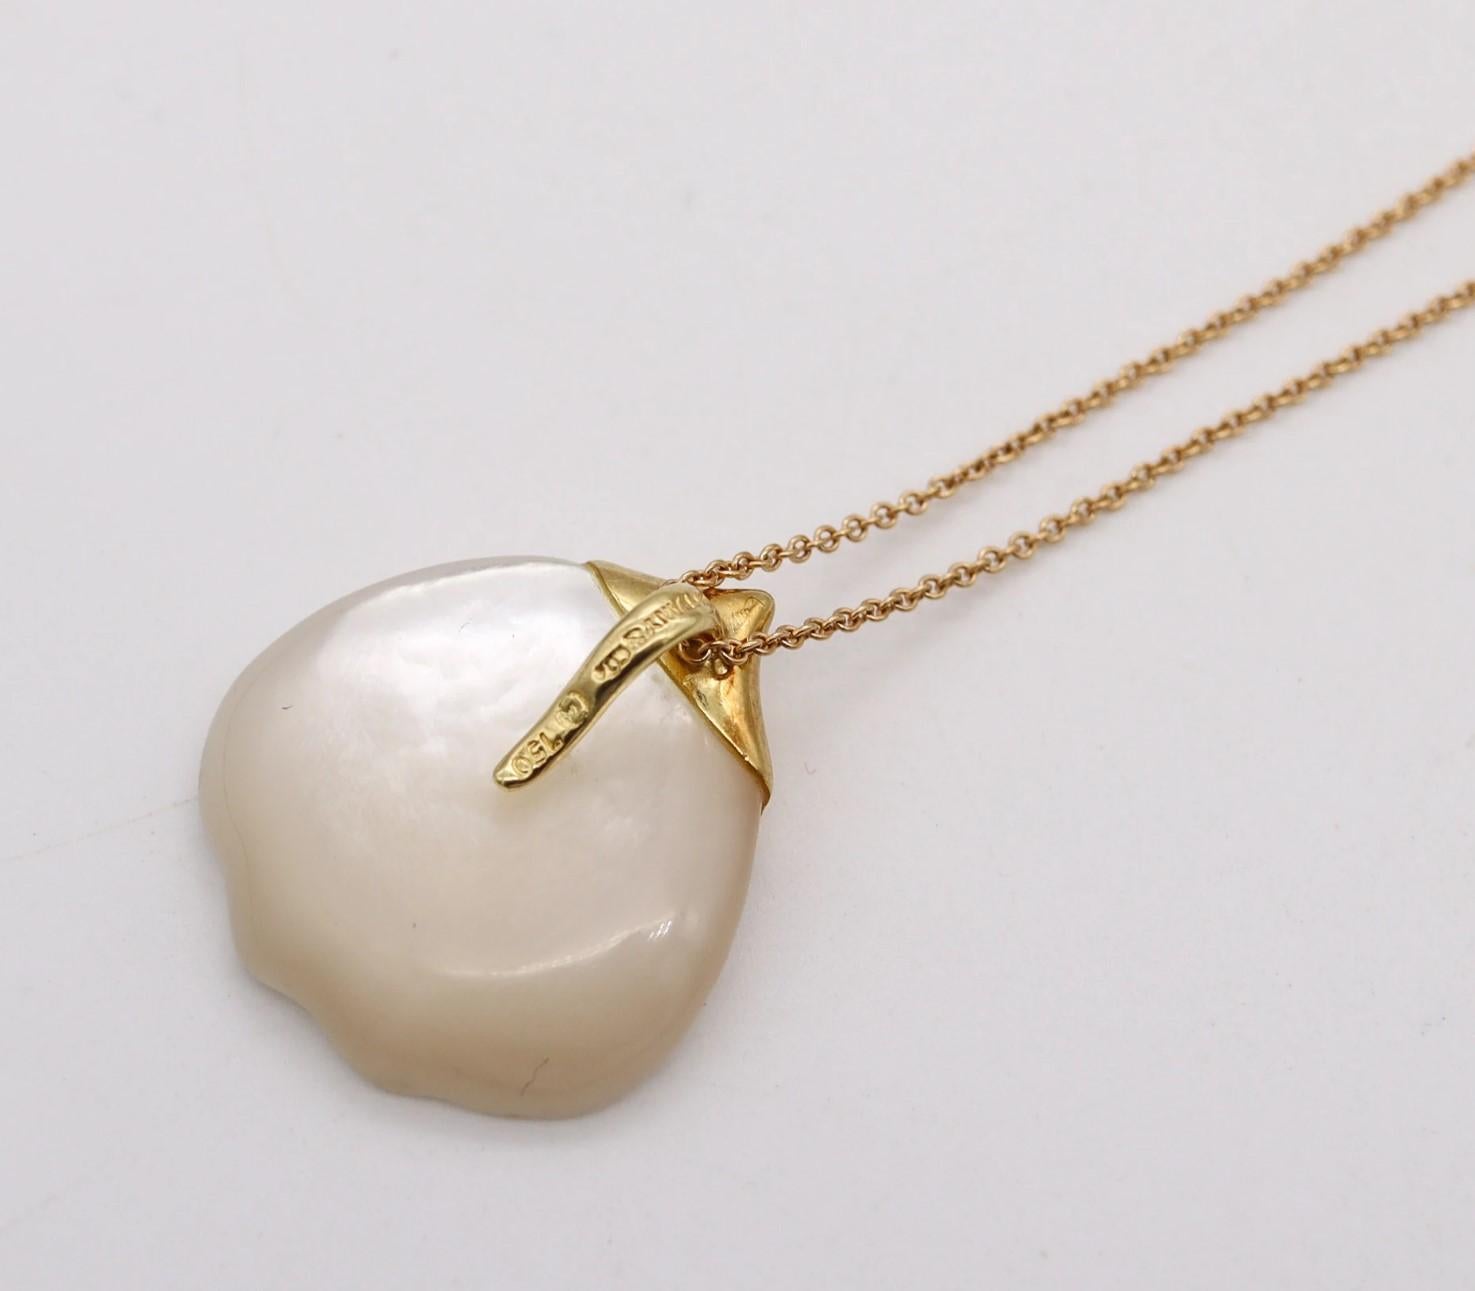 Tiffany & Co 1976 Angela Cummings White Nacre Petal Necklace in 18kt Yellow Gold In Excellent Condition For Sale In Miami, FL